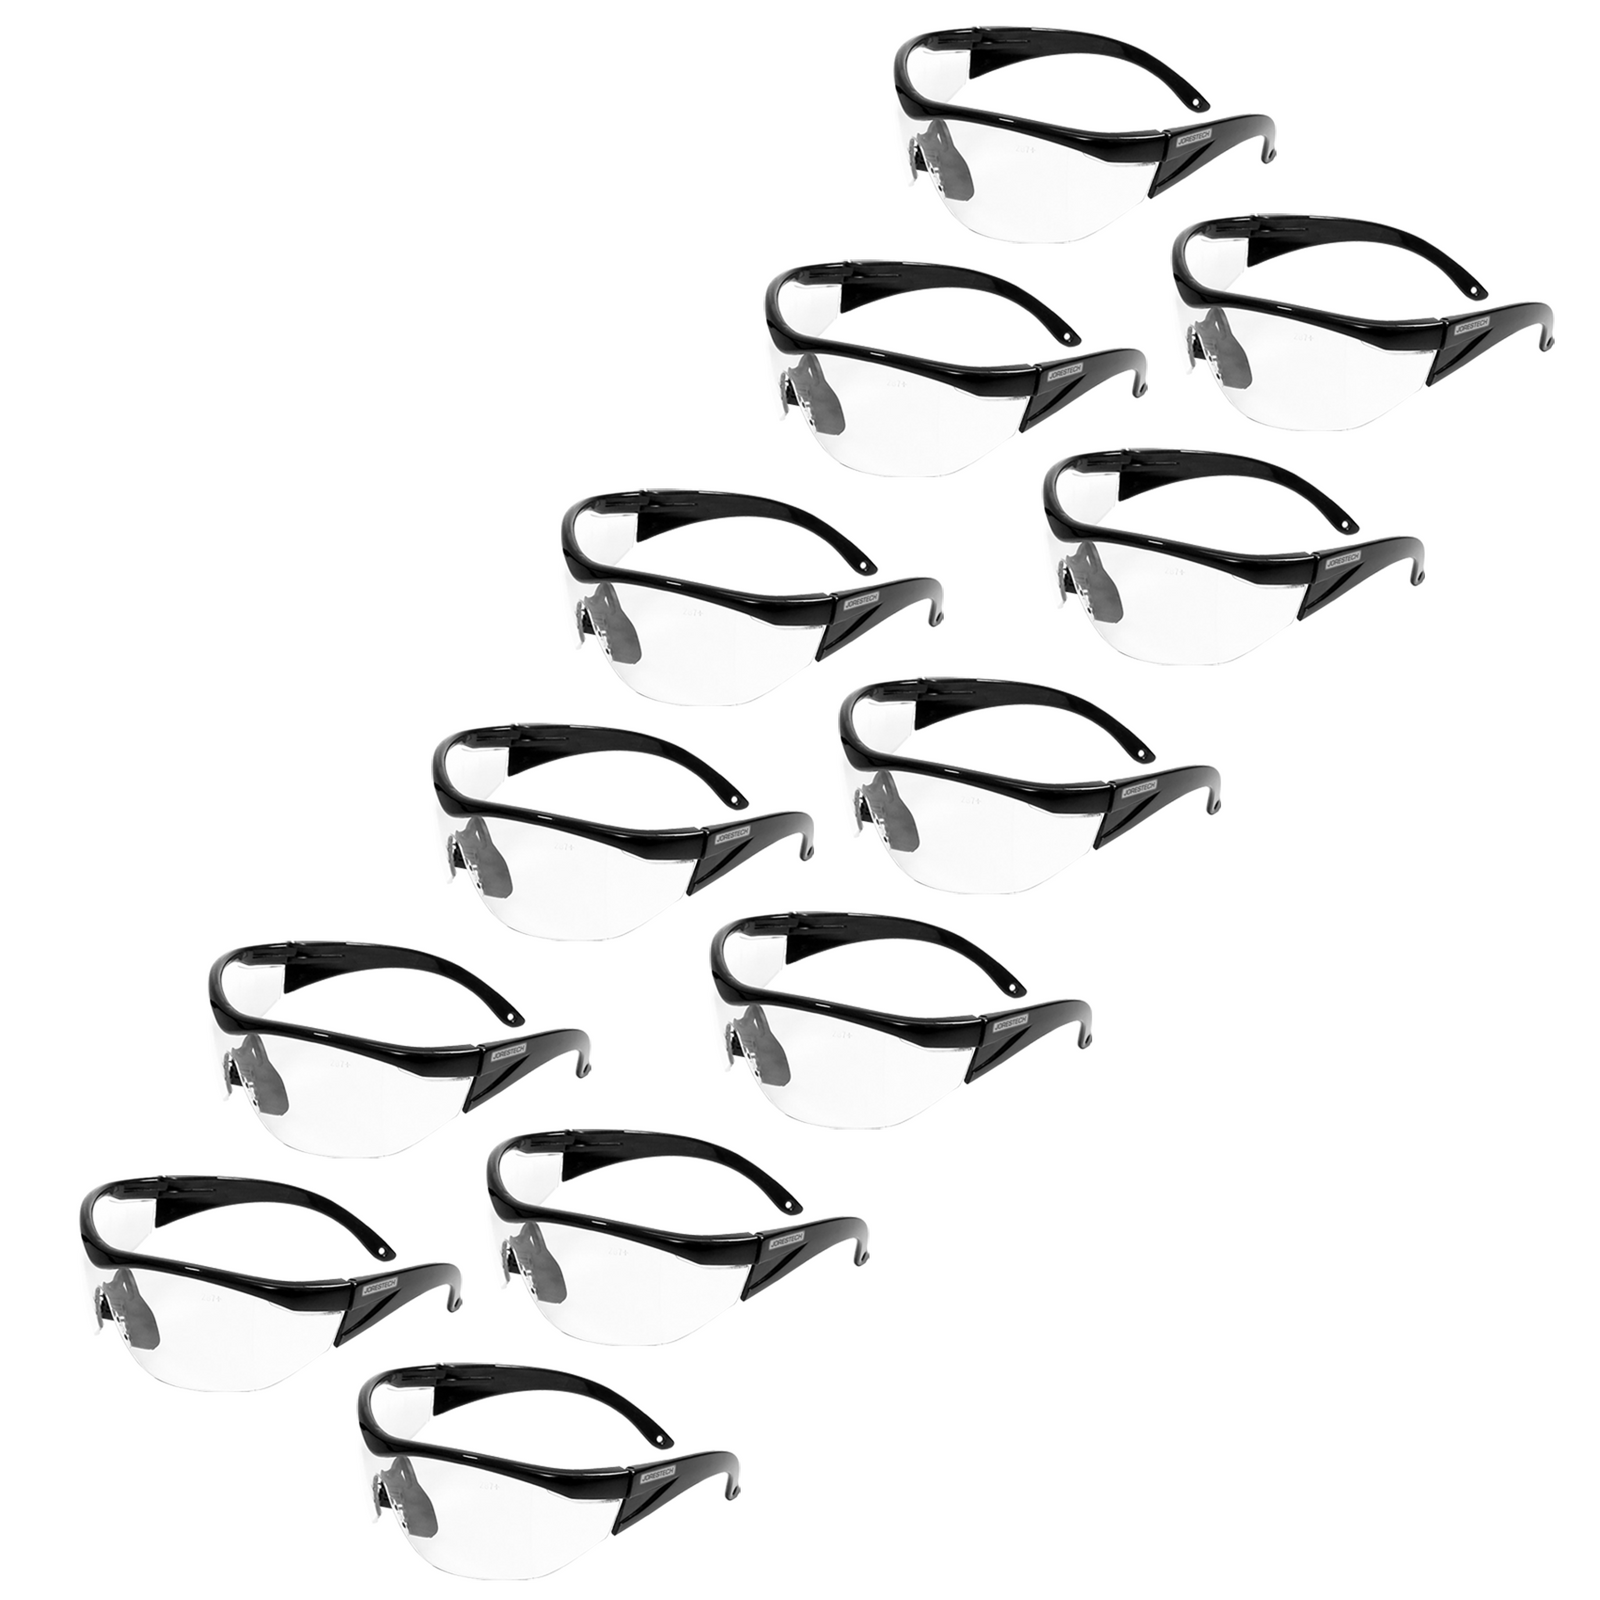 Pack of 12 modern design framed JORESTECH safety clear glasses with side shields for high impact protection. There is a embedder mark of the polycarbonate glass that reads Z87+ which is the ANSI standard